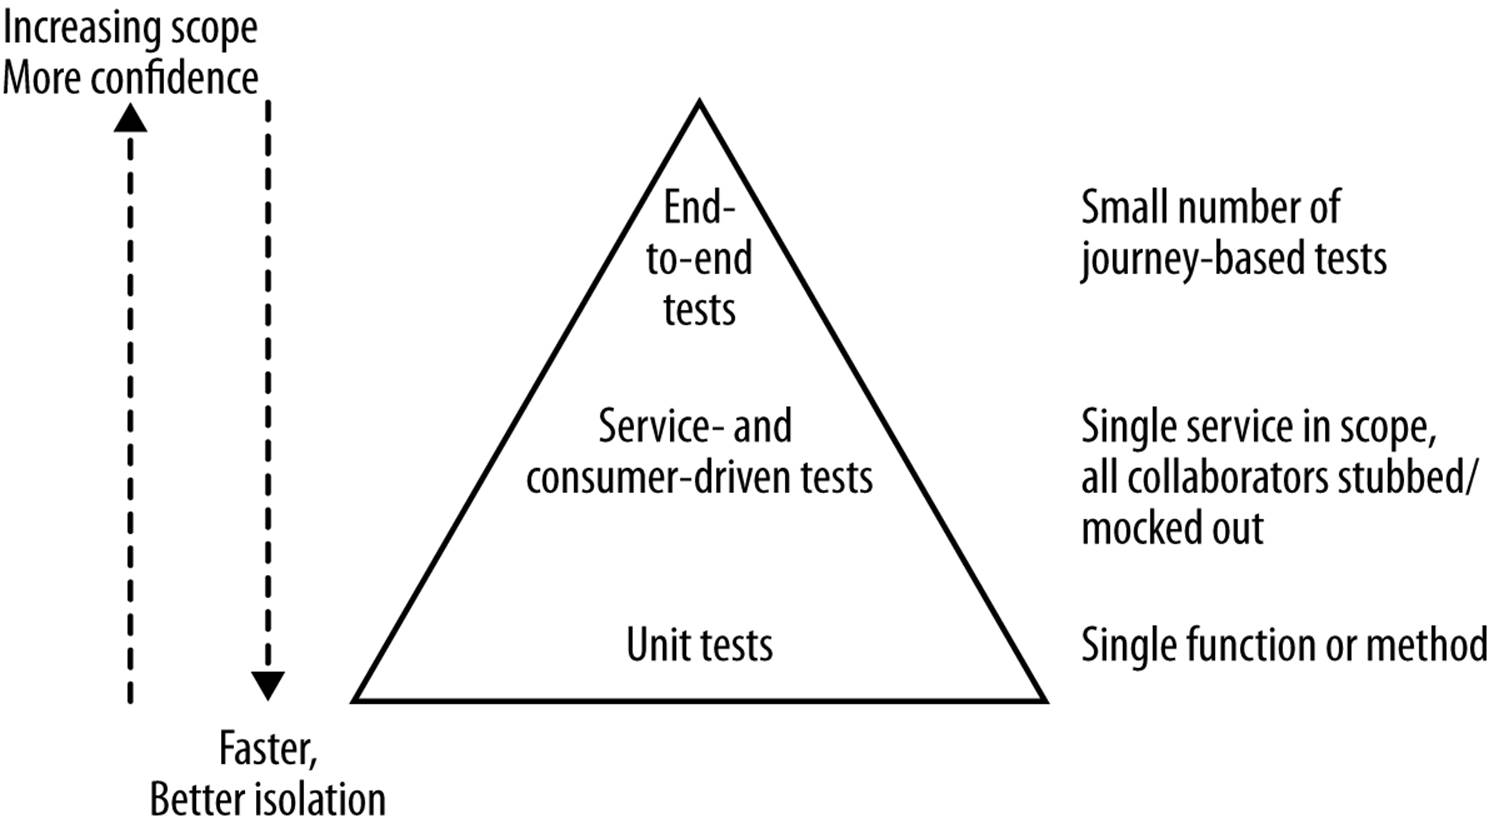 Integrating consumer-driven tests into the test pyramid